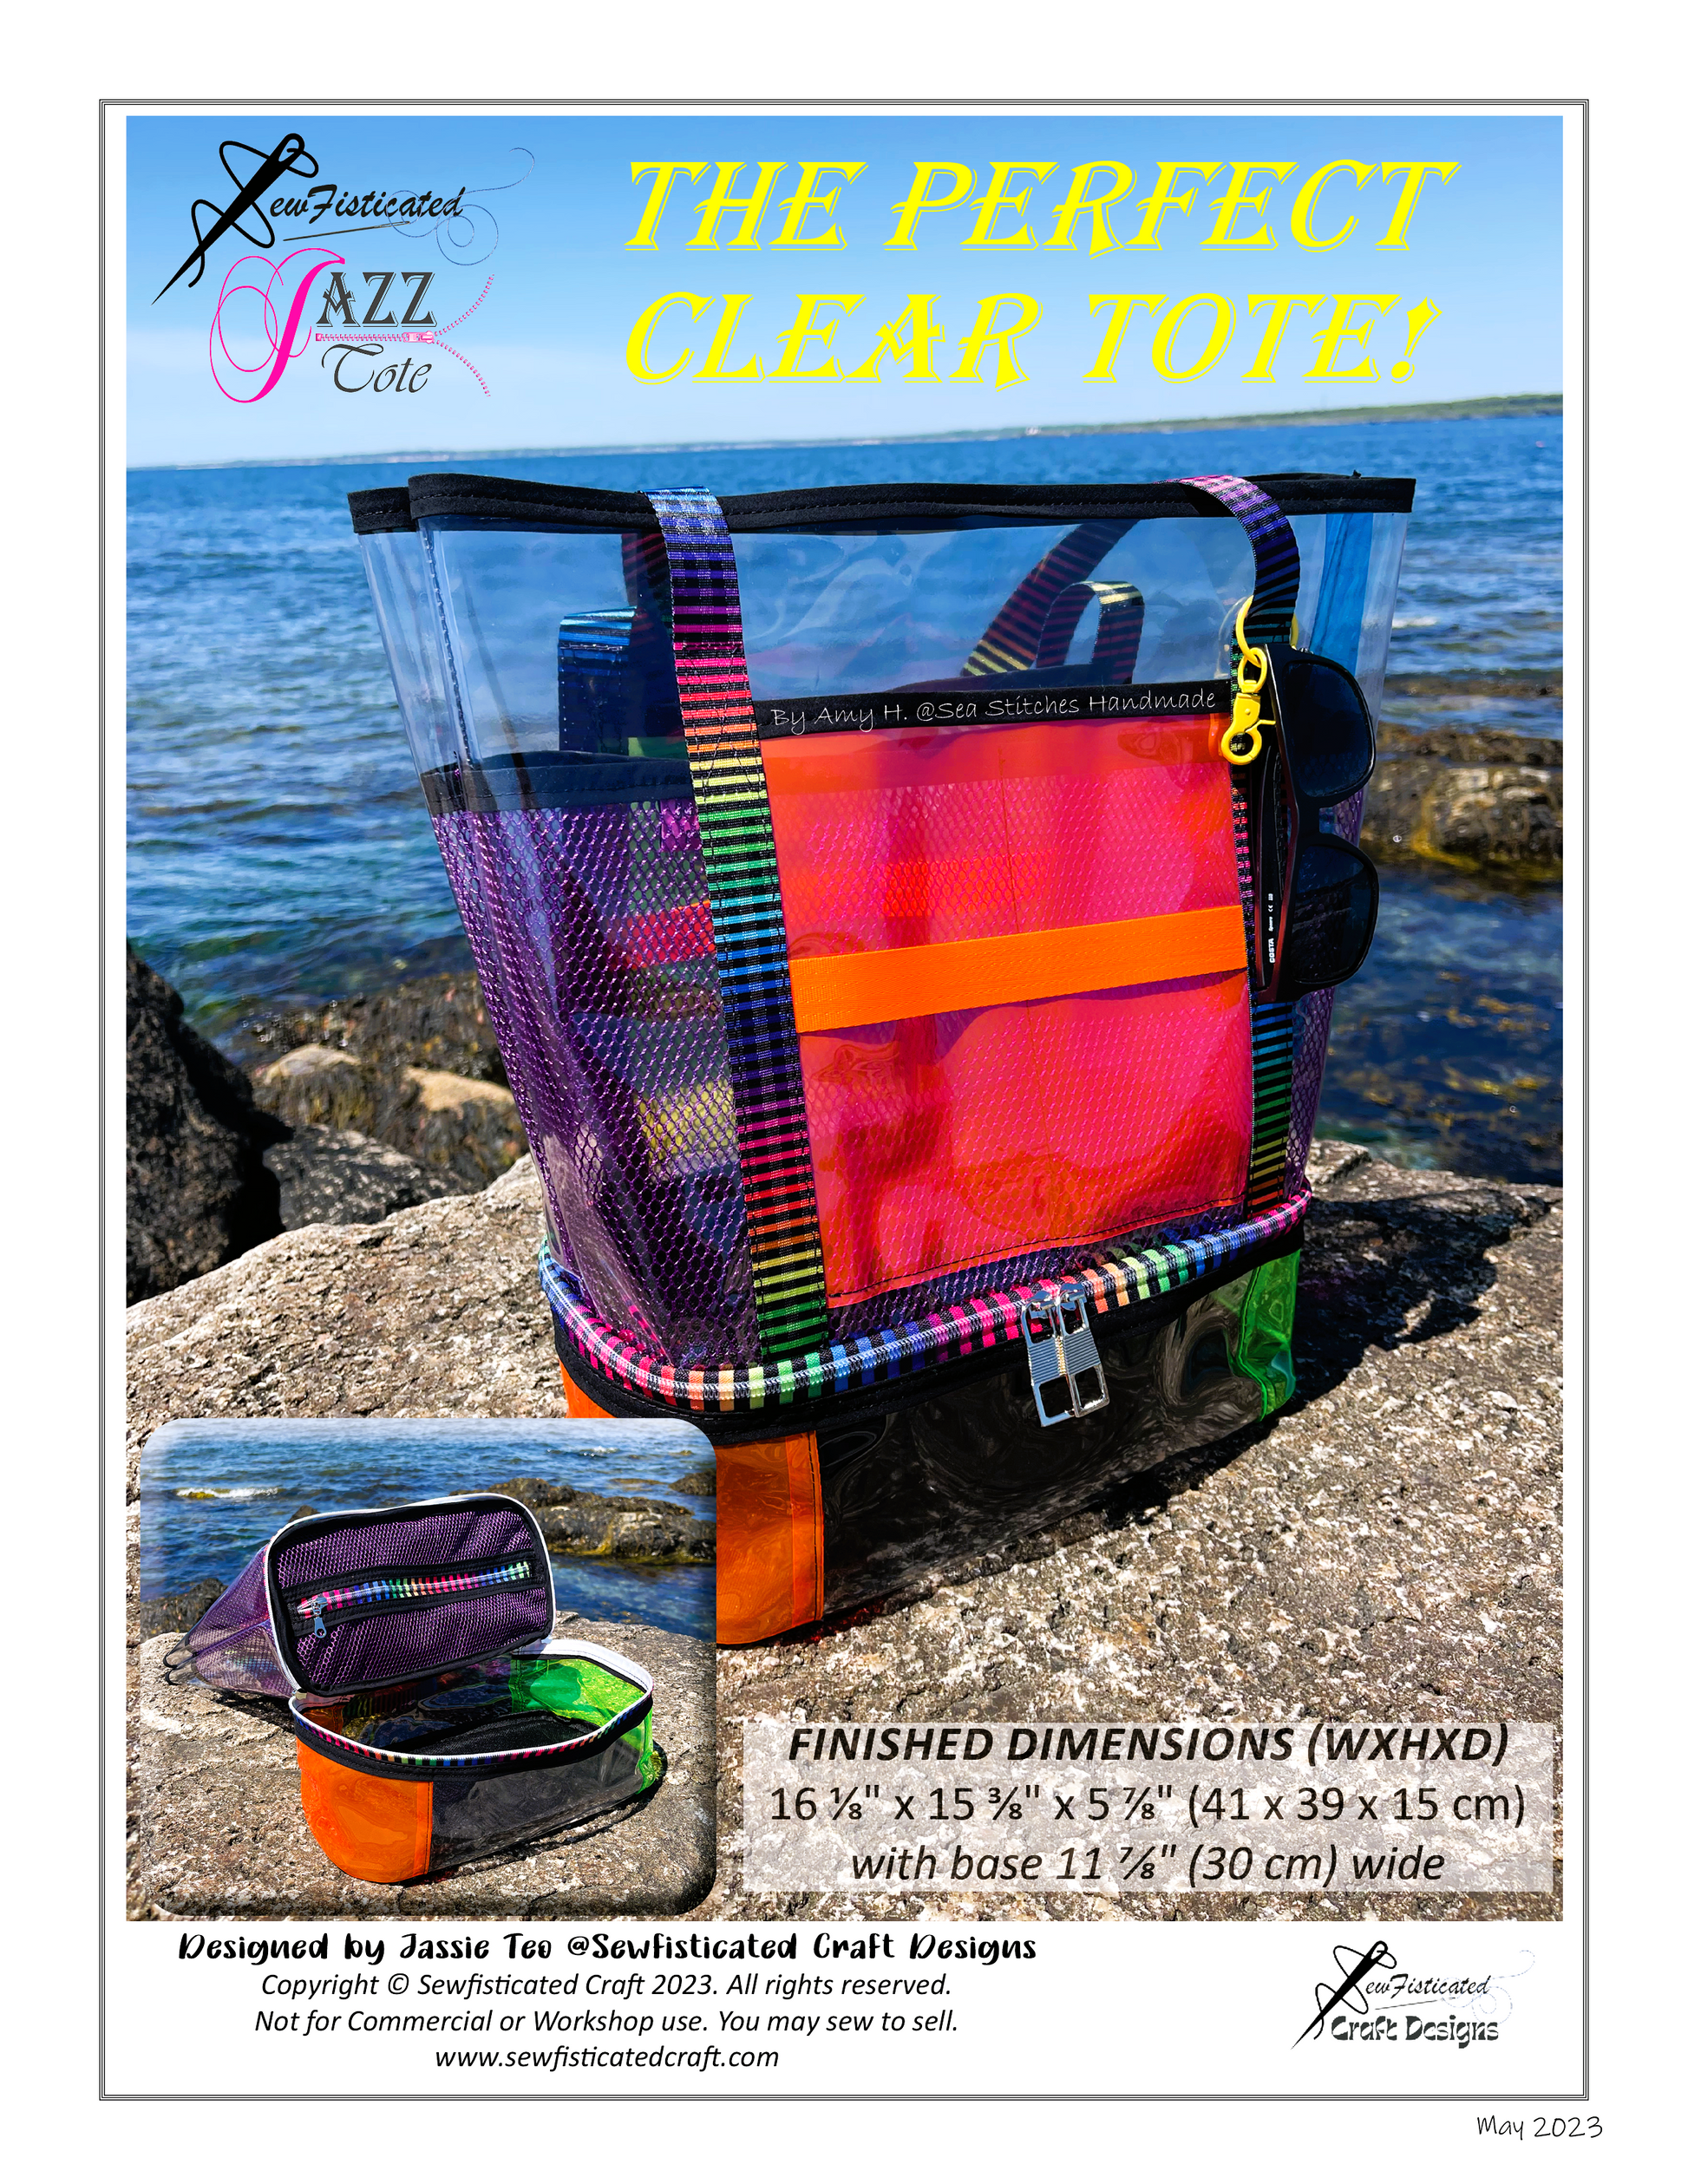 Promotional TPU/PVC Clear Tote Beach Bag for Ladies Reusable